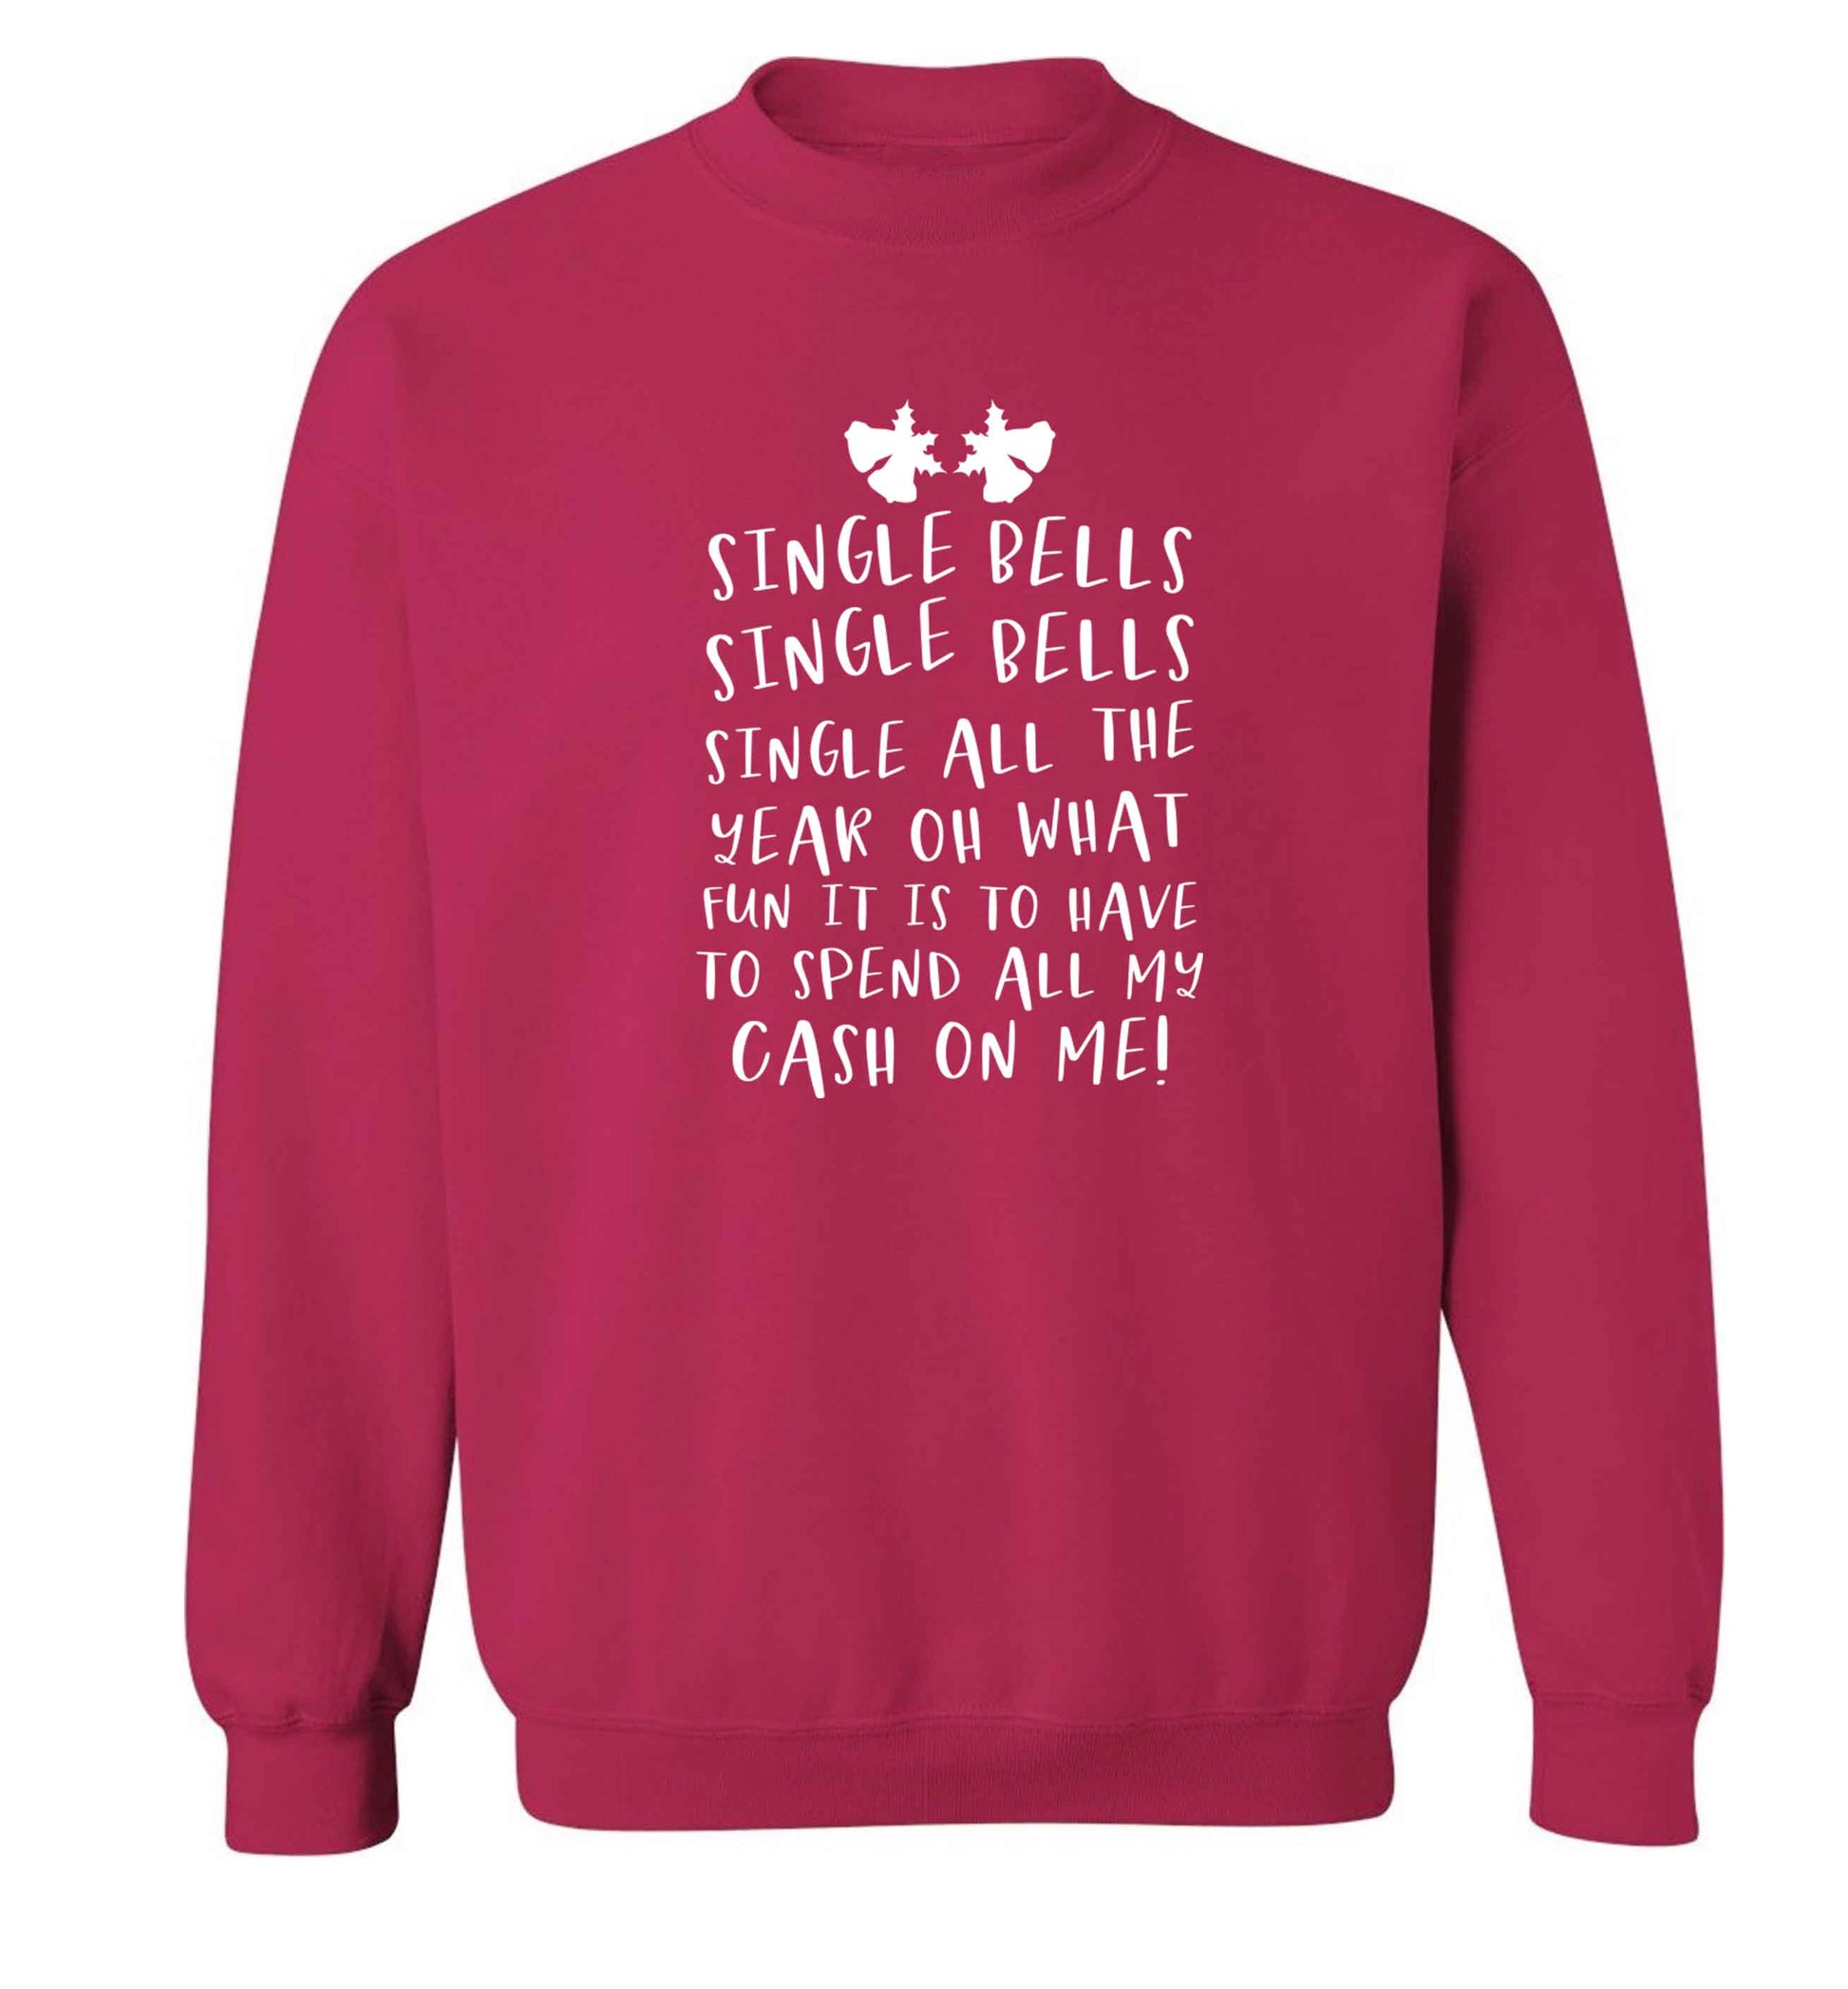 Single bells oh what fun it is to have to spend all my cash on me! Adult's unisex pink Sweater 2XL